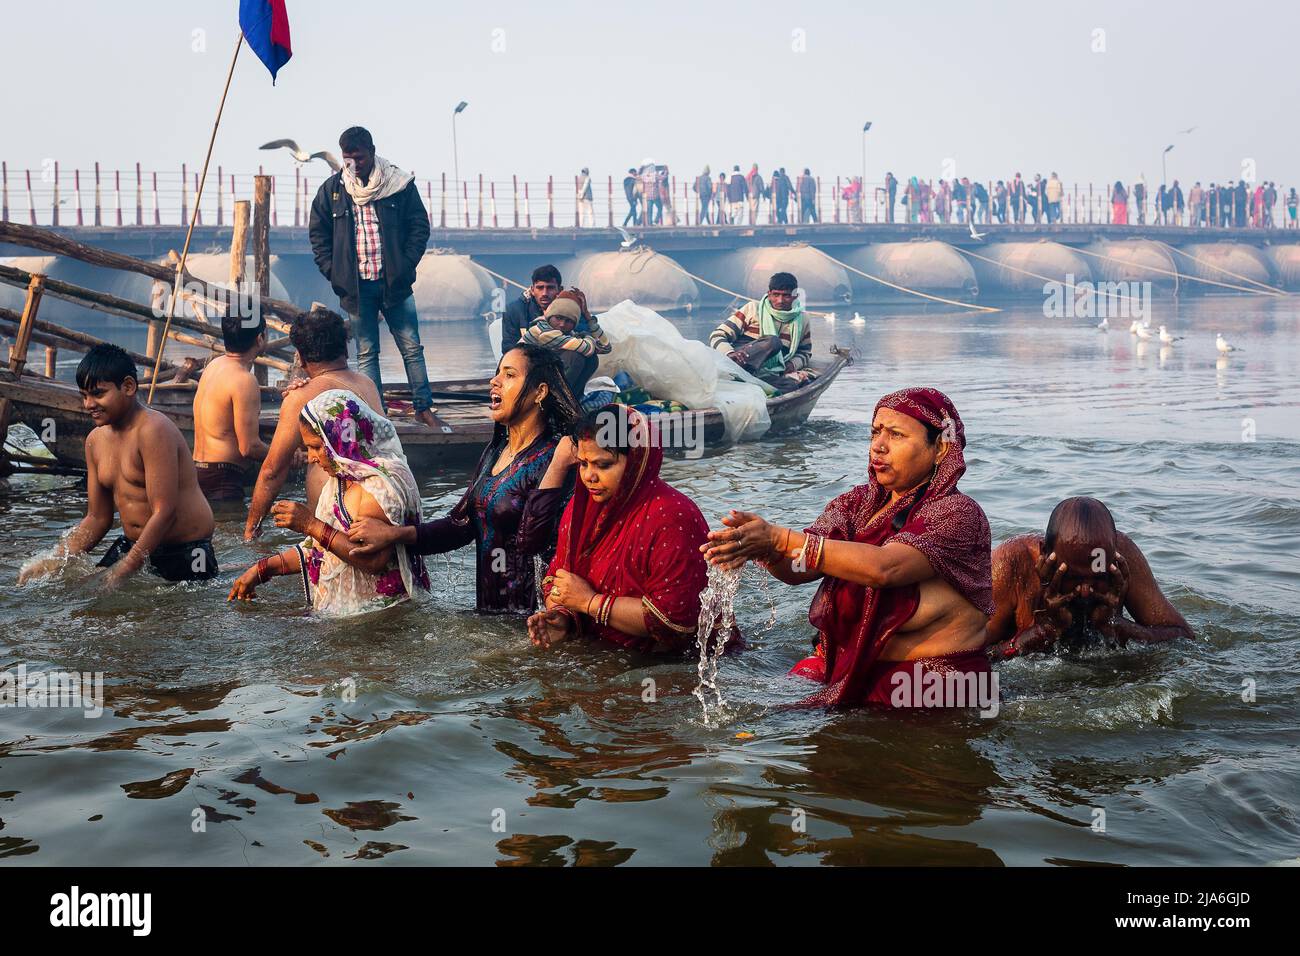 Pilgrims bathe in the holy waters of the Ganges river during the Kumbh Mela festival. Every twelve years, millions of Hindu devotees begin a massive pilgrimage to the most sacred of Indian festivals: the Kumbha Mela, which takes place in Prayagraj, a place considered particularly auspicious because it is at the confluence of the Ganges, Yamuna and the mythical Saraswati. It is estimated that in 2019, 120 million people attended the sacred enclosure over the course of a month and a half. These numbers, equivalent to the total population of Japan, and 40 times the number of pilgrims who visit Me Stock Photo